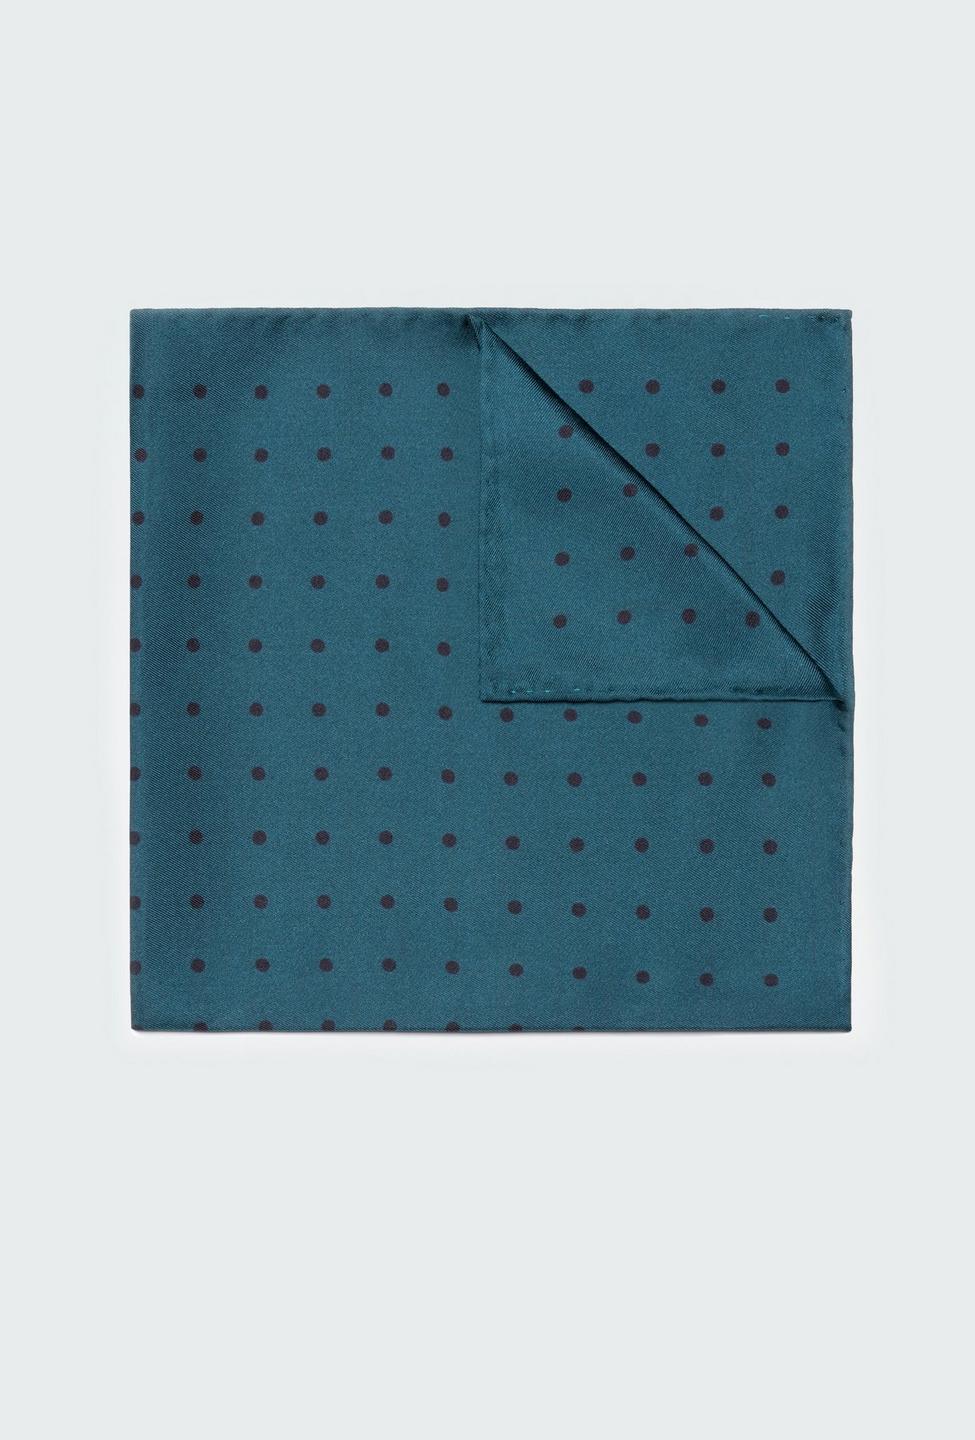 Blue and Green pocket square - Pattern Design from Indochino Collection